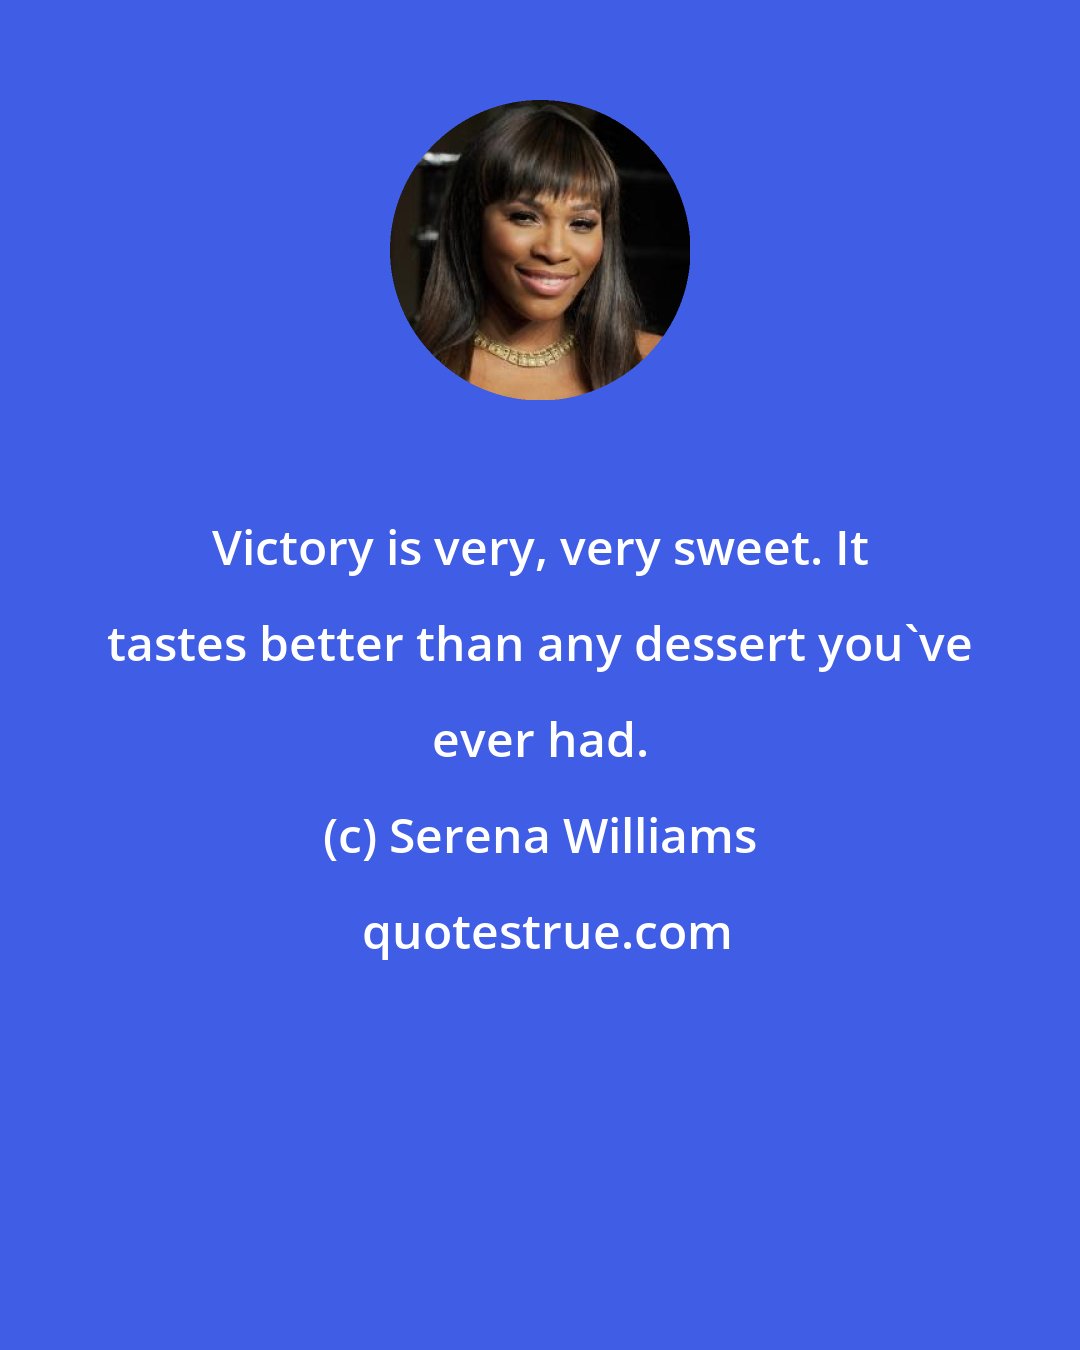 Serena Williams: Victory is very, very sweet. It tastes better than any dessert you've ever had.